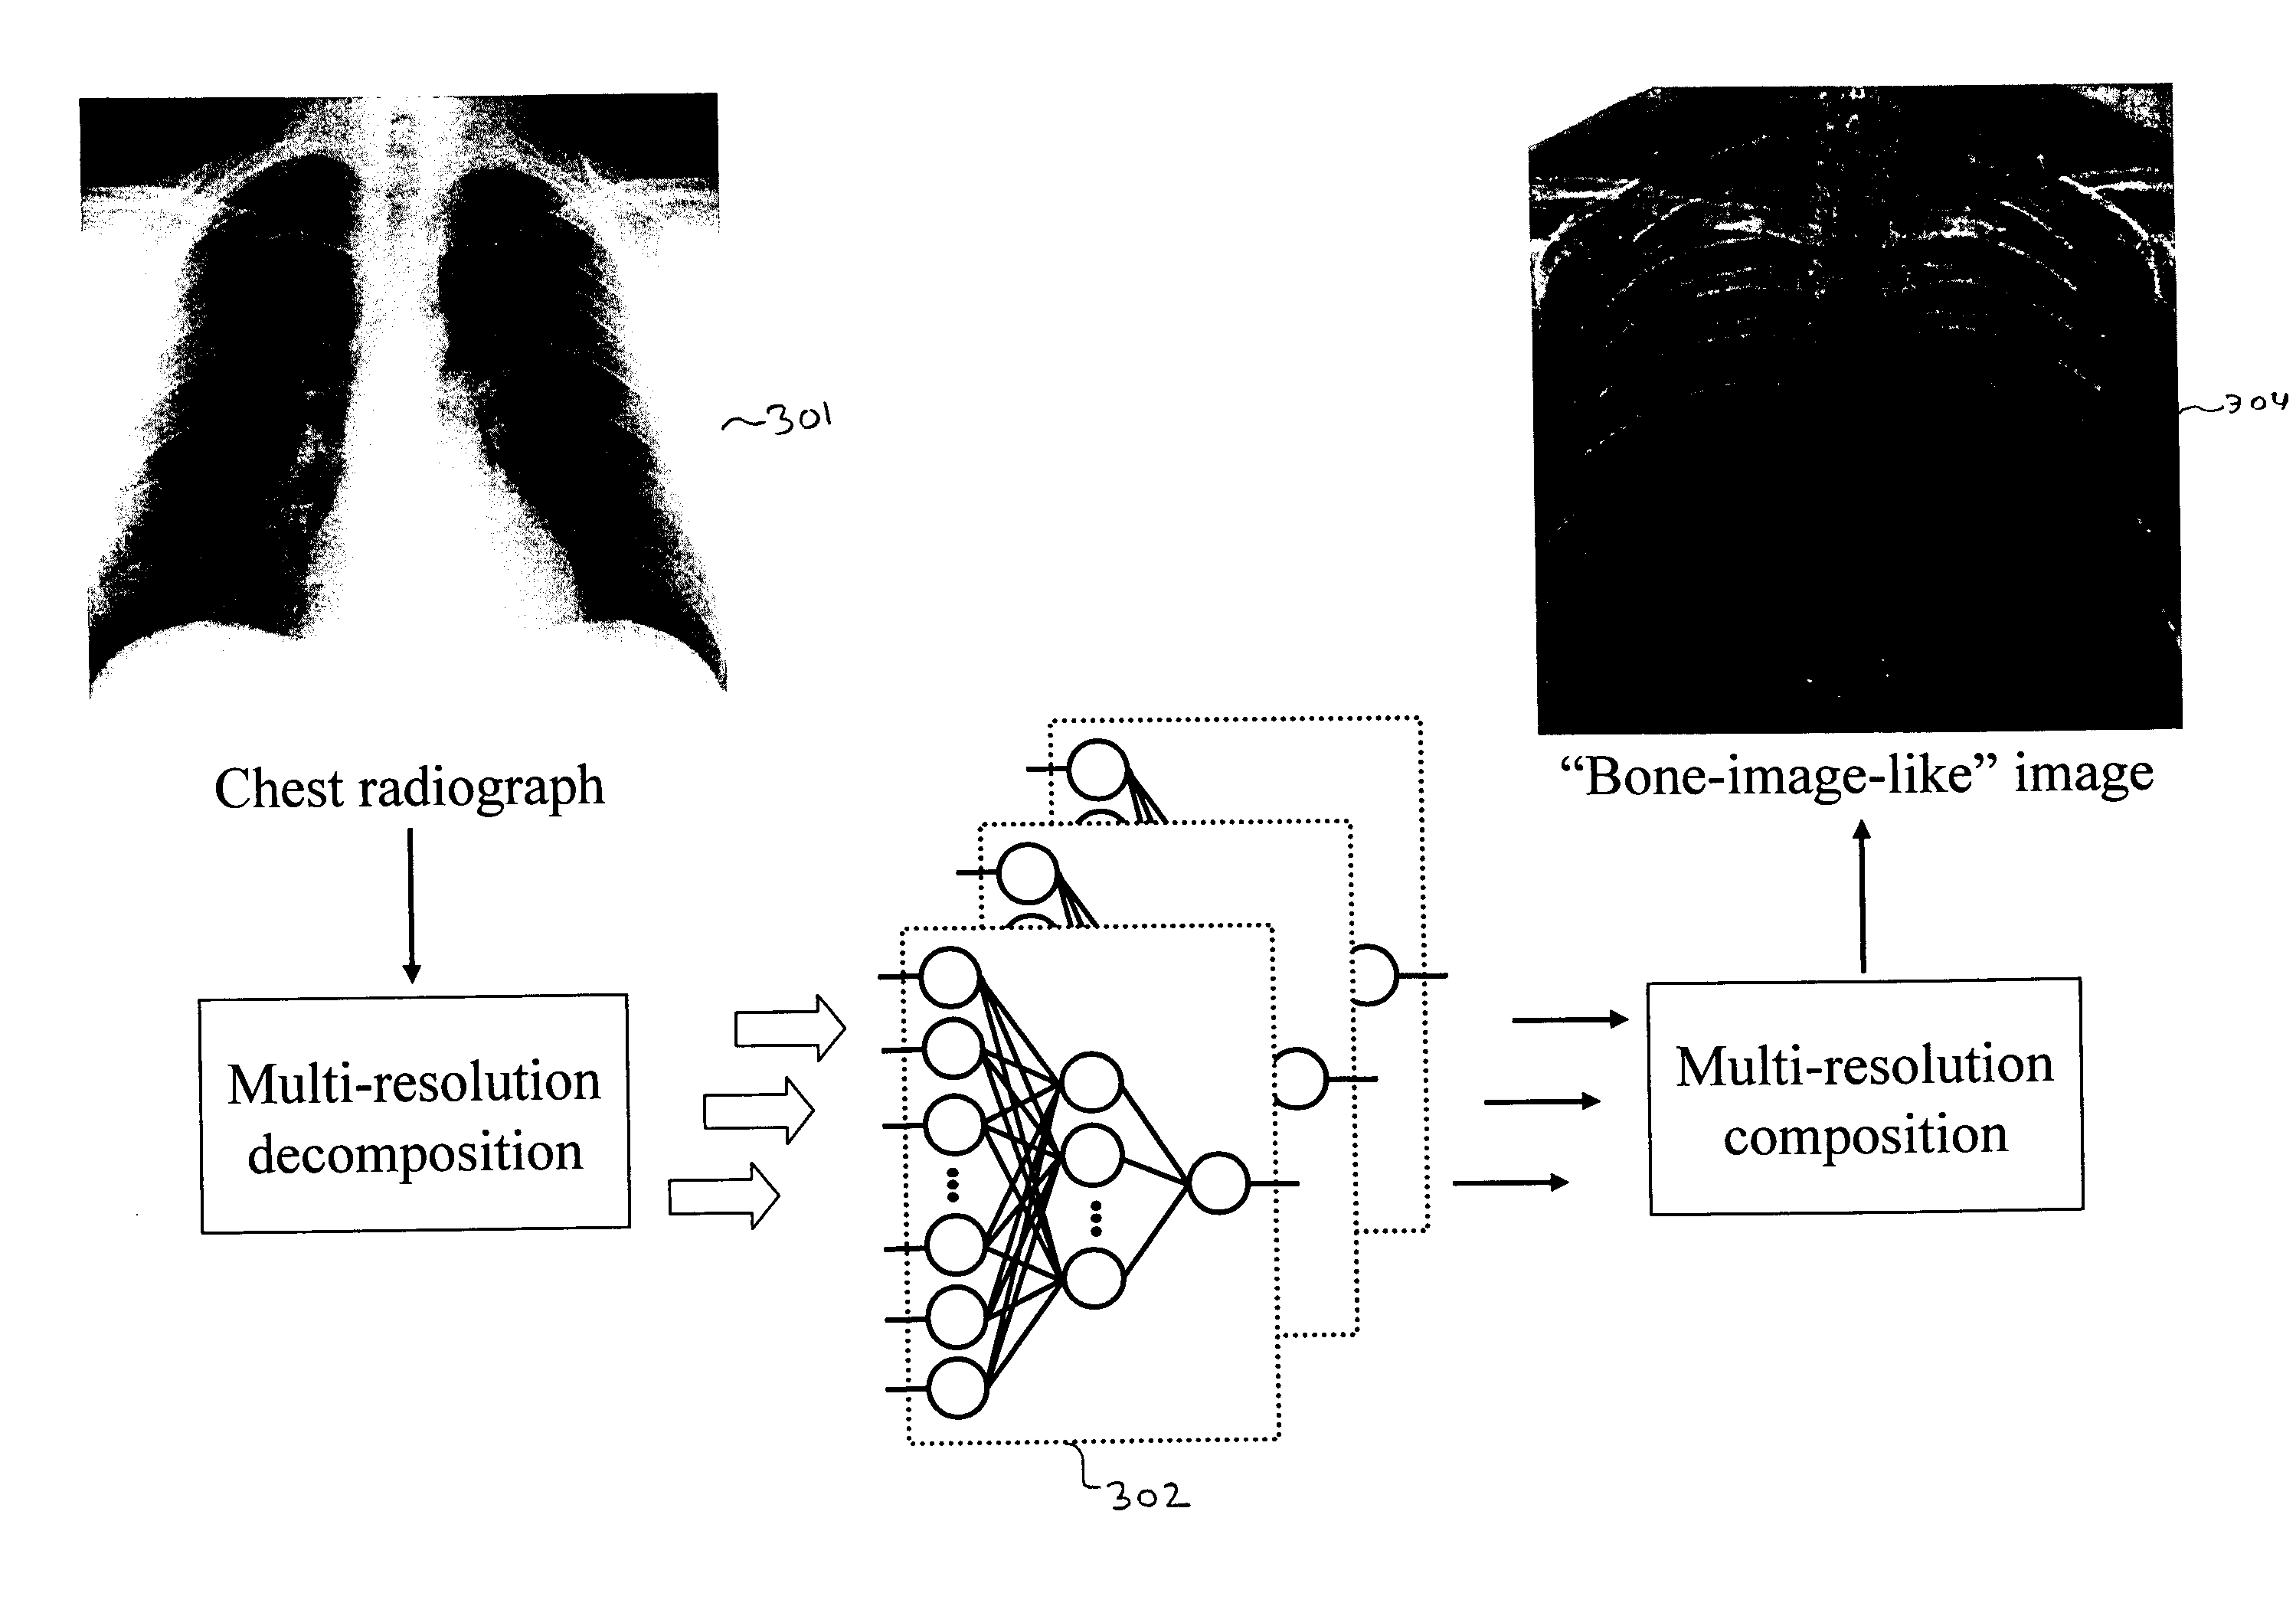 Image modification and detection using massive training artificial neural networks (MTANN)